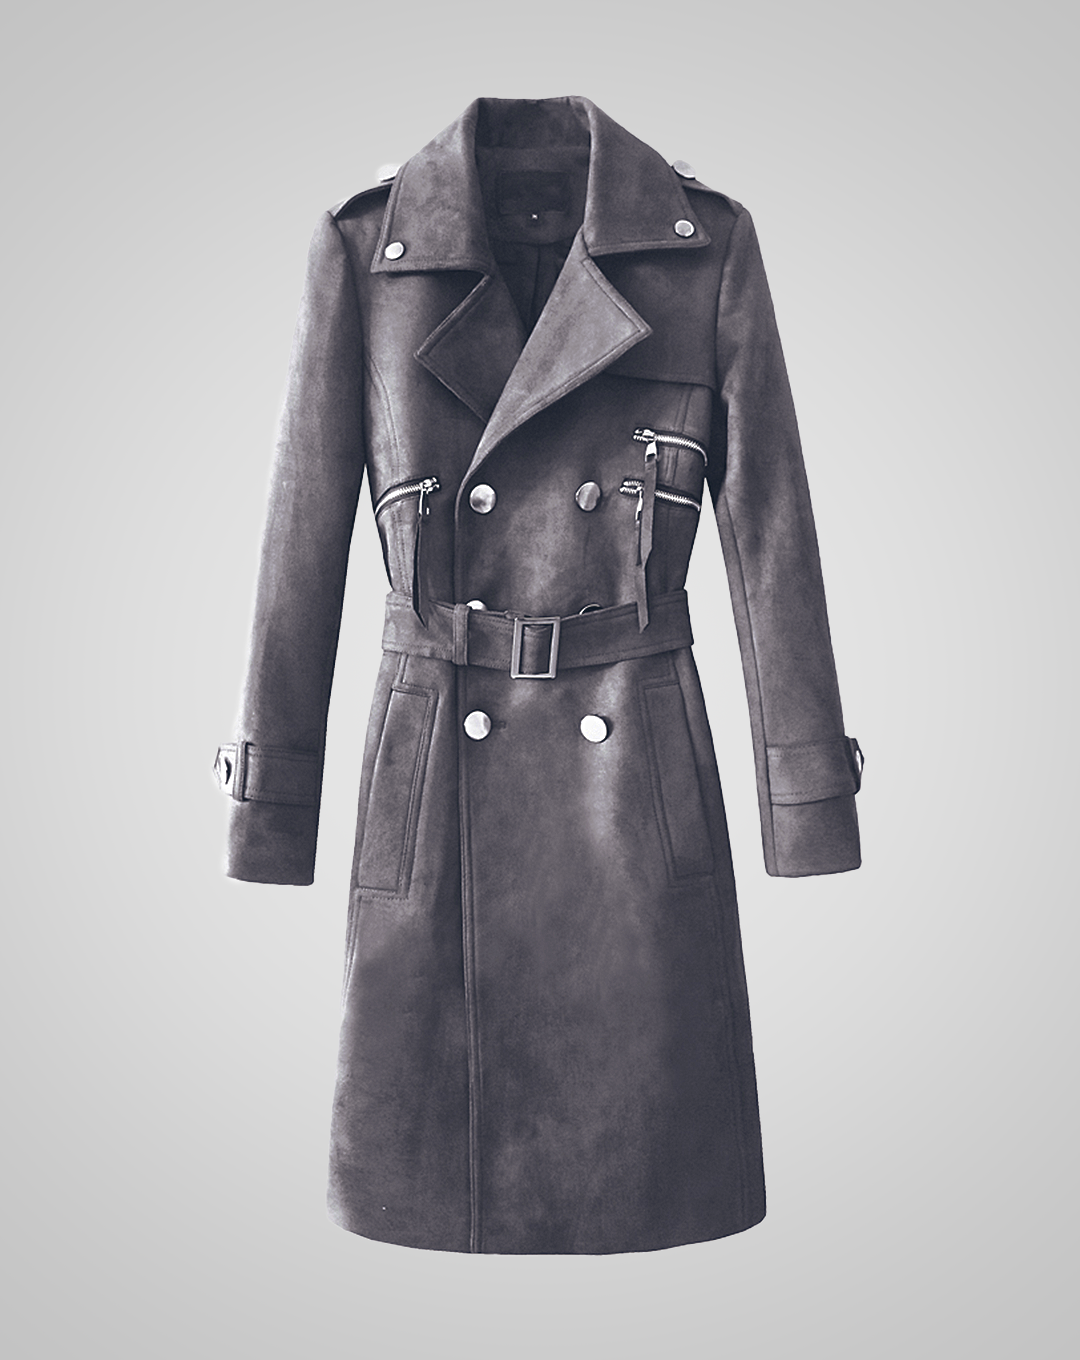 ♂Nuance Trench Coat